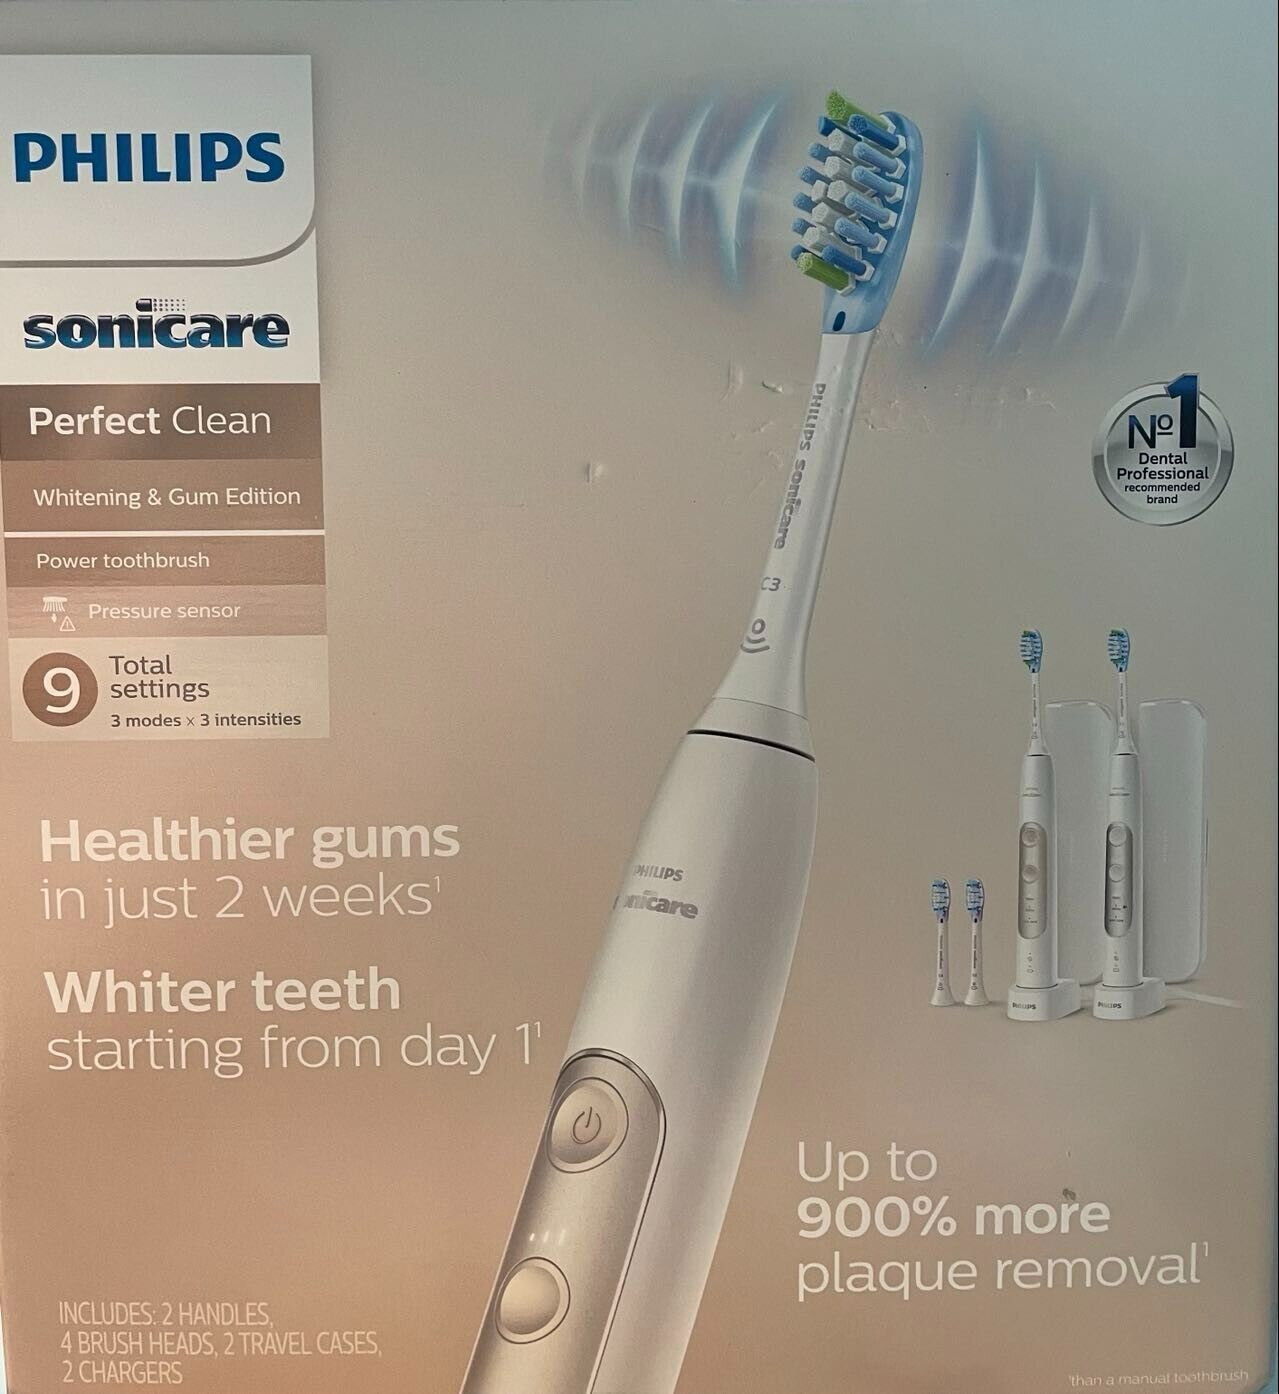 Philips Sonicare PerfectClean Rechargeable Toothbrush, White 2-pack HX7514/01